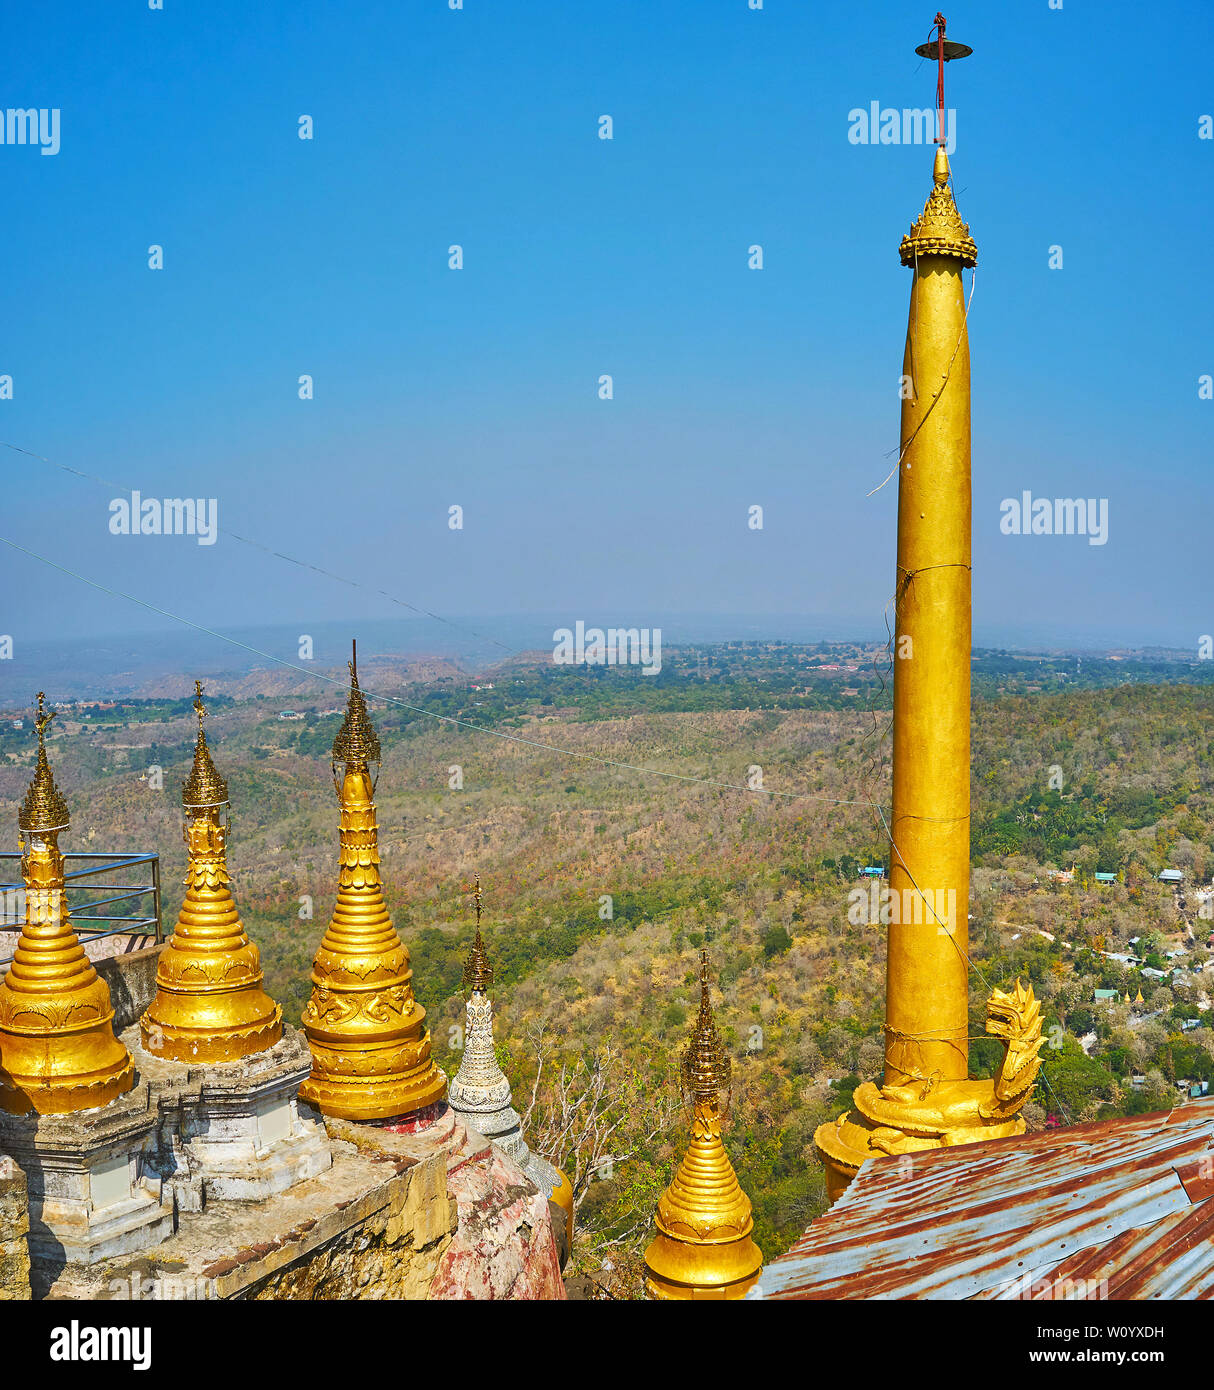 The small golden stupas and tall slender Buddhist pillar in Taung Kalat monastery  on the edge of Popa mountain outcrop, with a view on green hills og Stock Photo